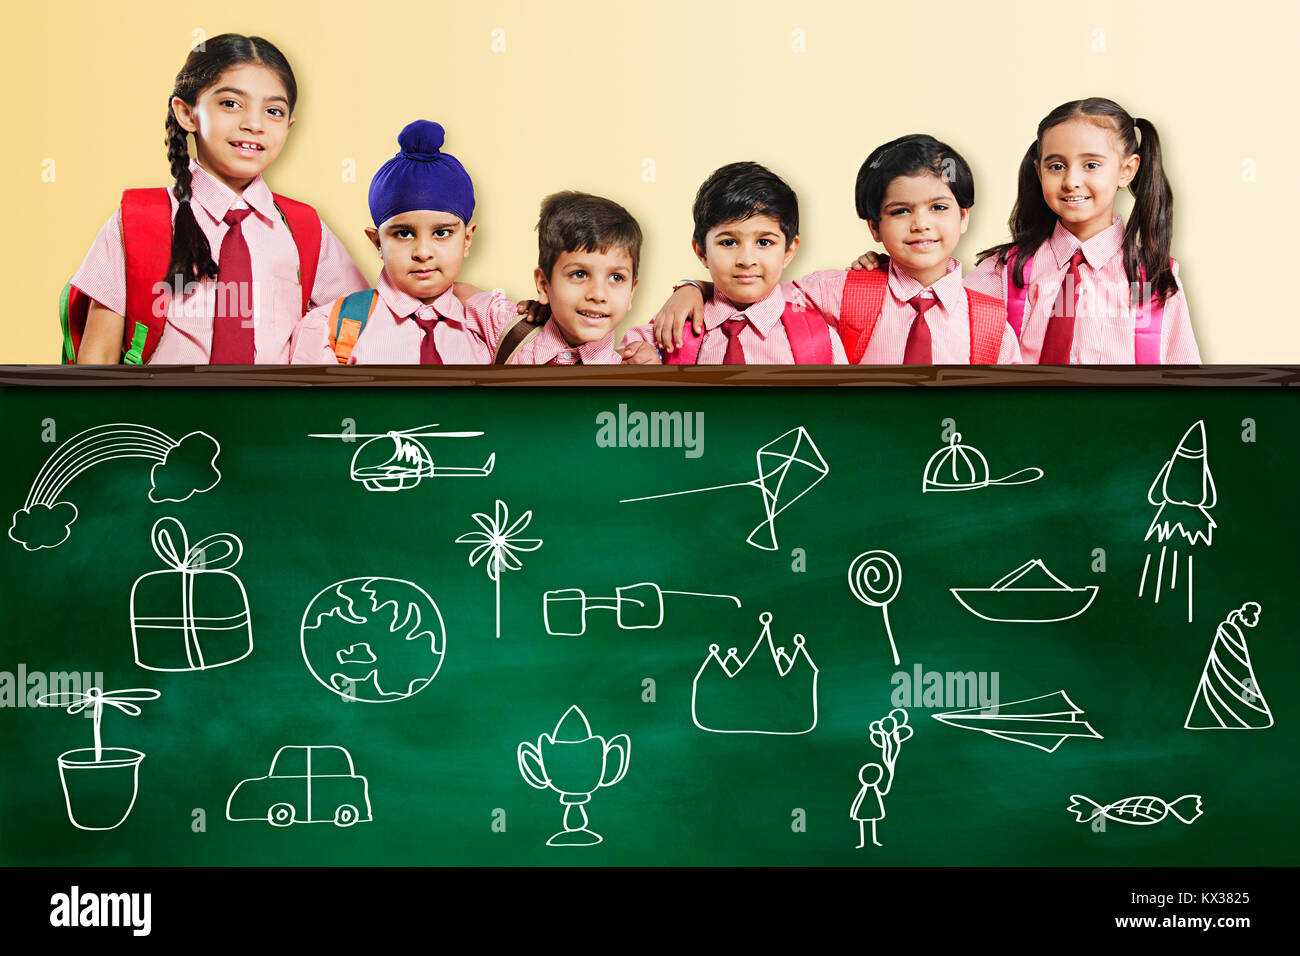 Group Indian School Childrens Students Classmate Blackboard Education in Classroom Stock Photo